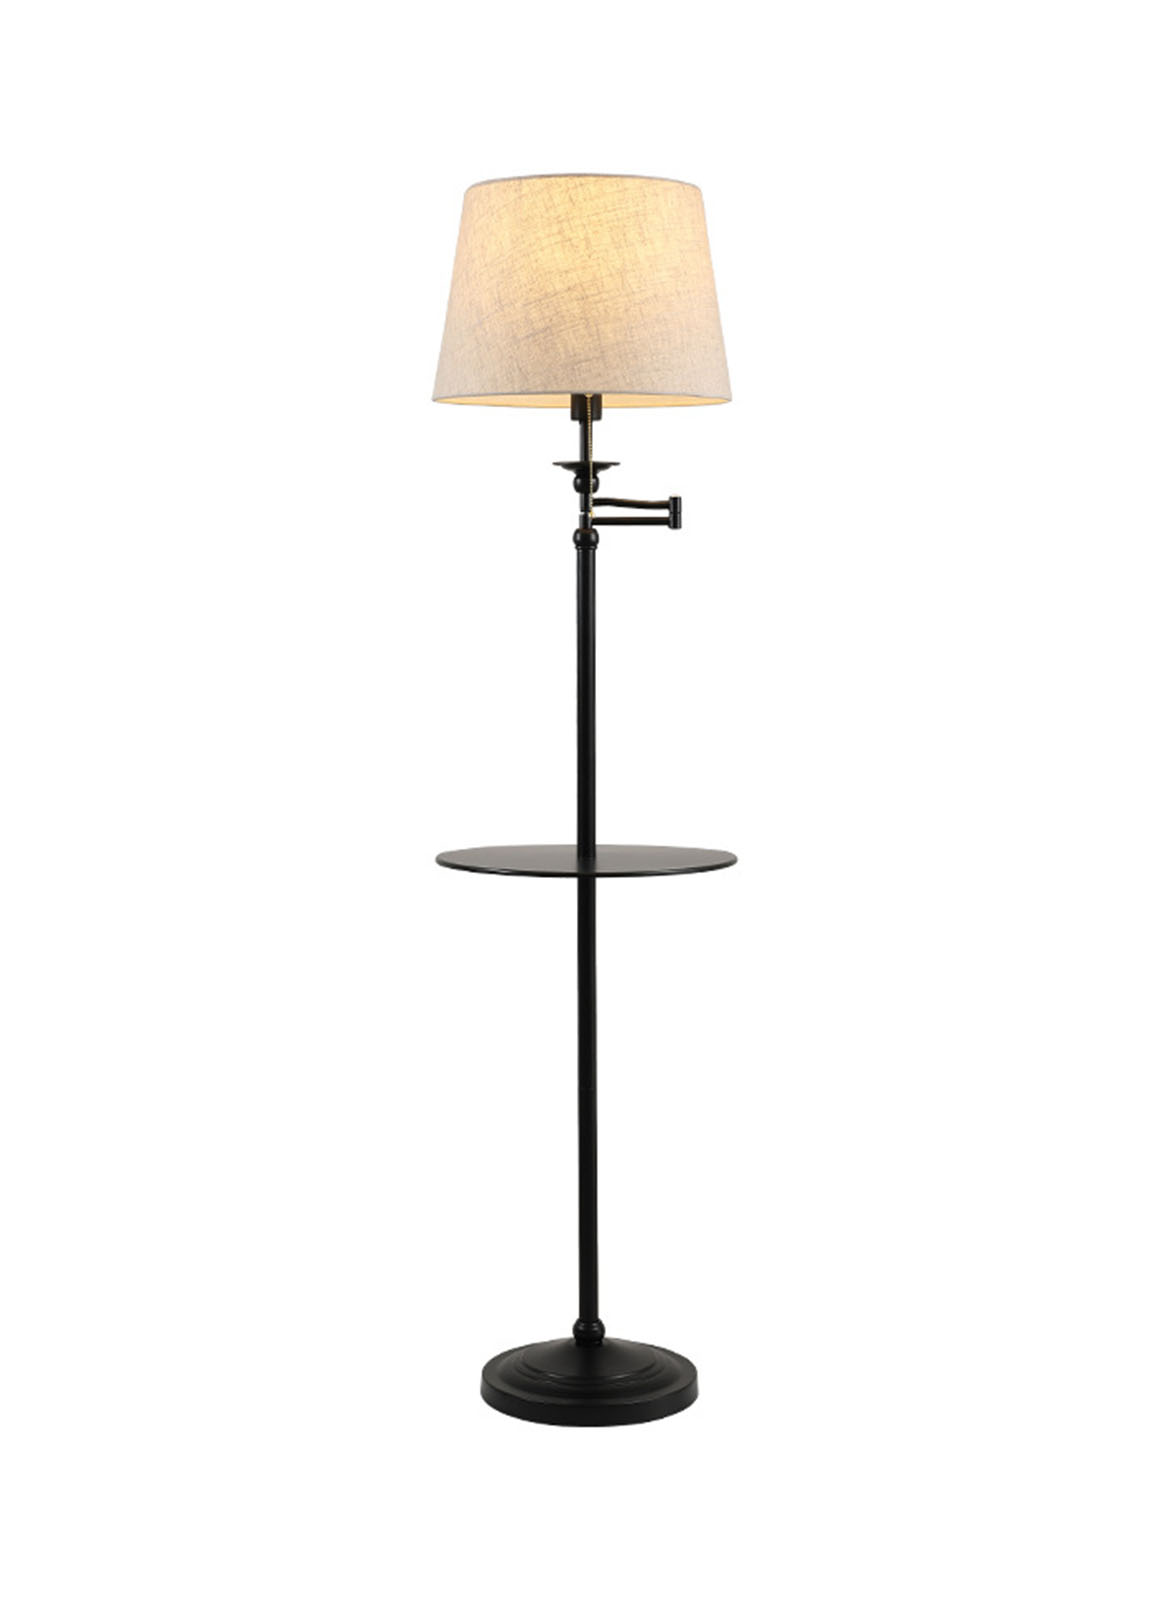 Modern Bedroom Bedside Floor Lamp with Remote Control Dimming and Color Adjustment 12W